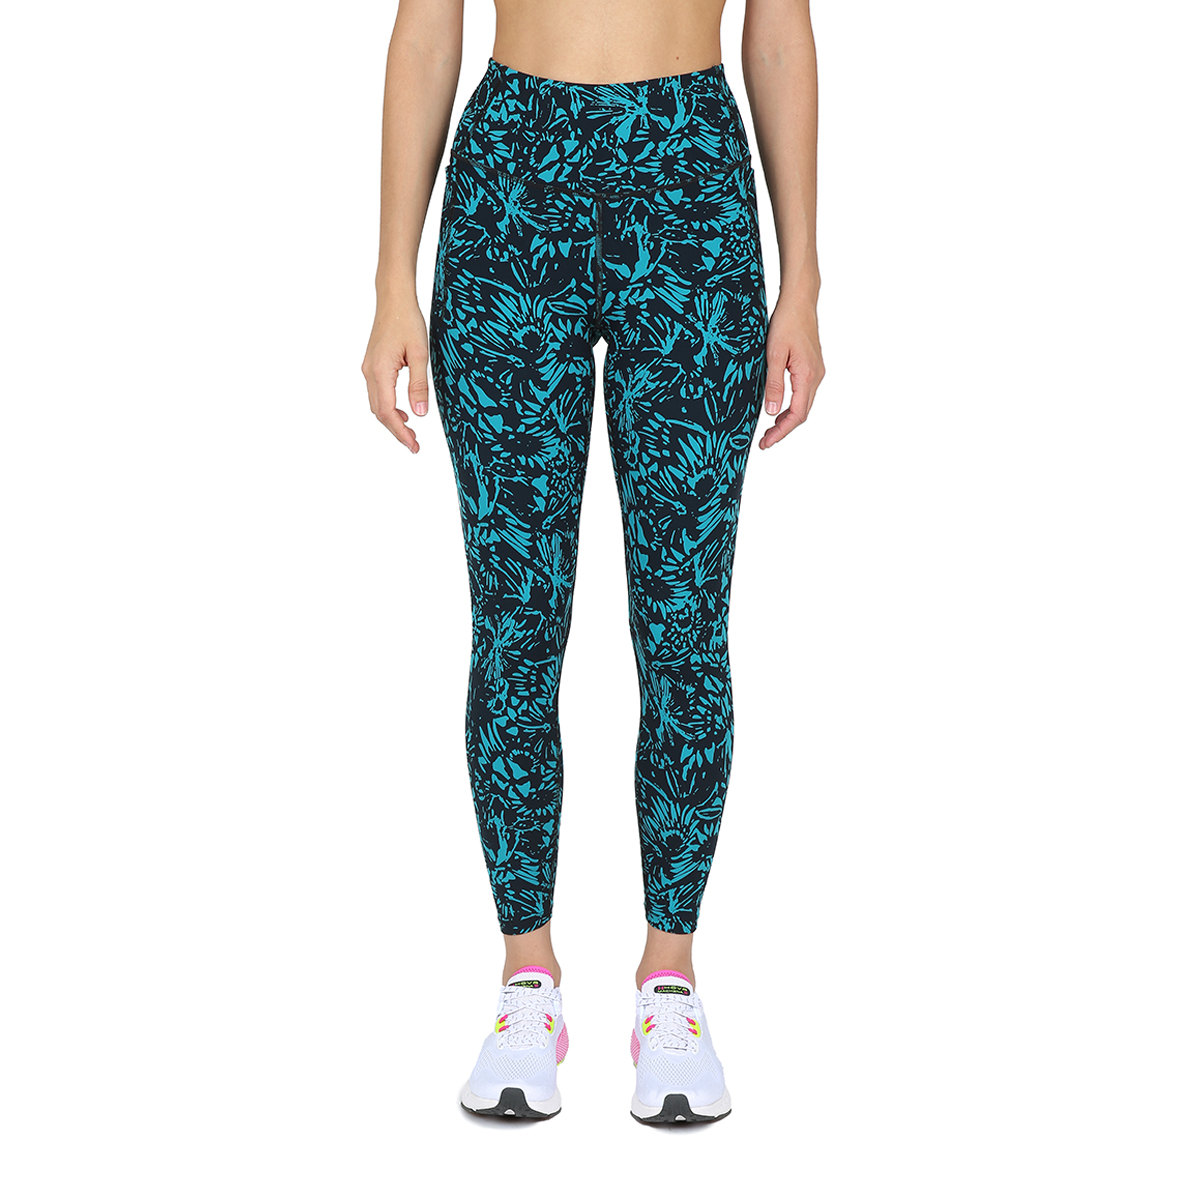 Calza Entrenamiento Under Armour Meridian Print Mujer,  image number null